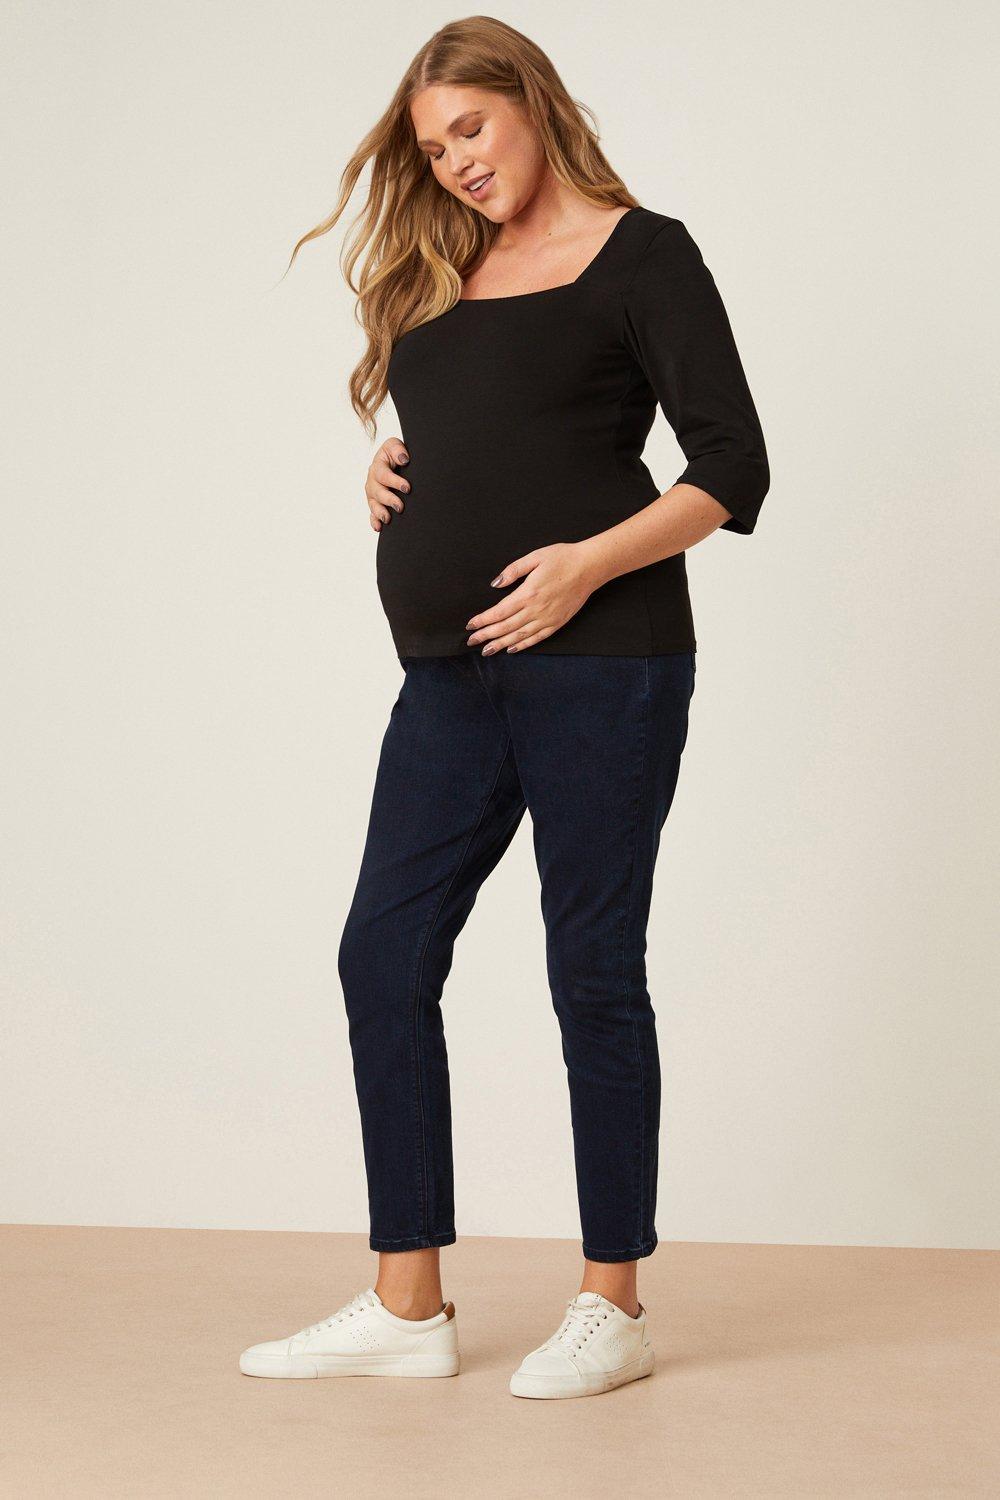 Women’s Maternity Over Bump Darcy Skinny Jeans - blue_black - 8